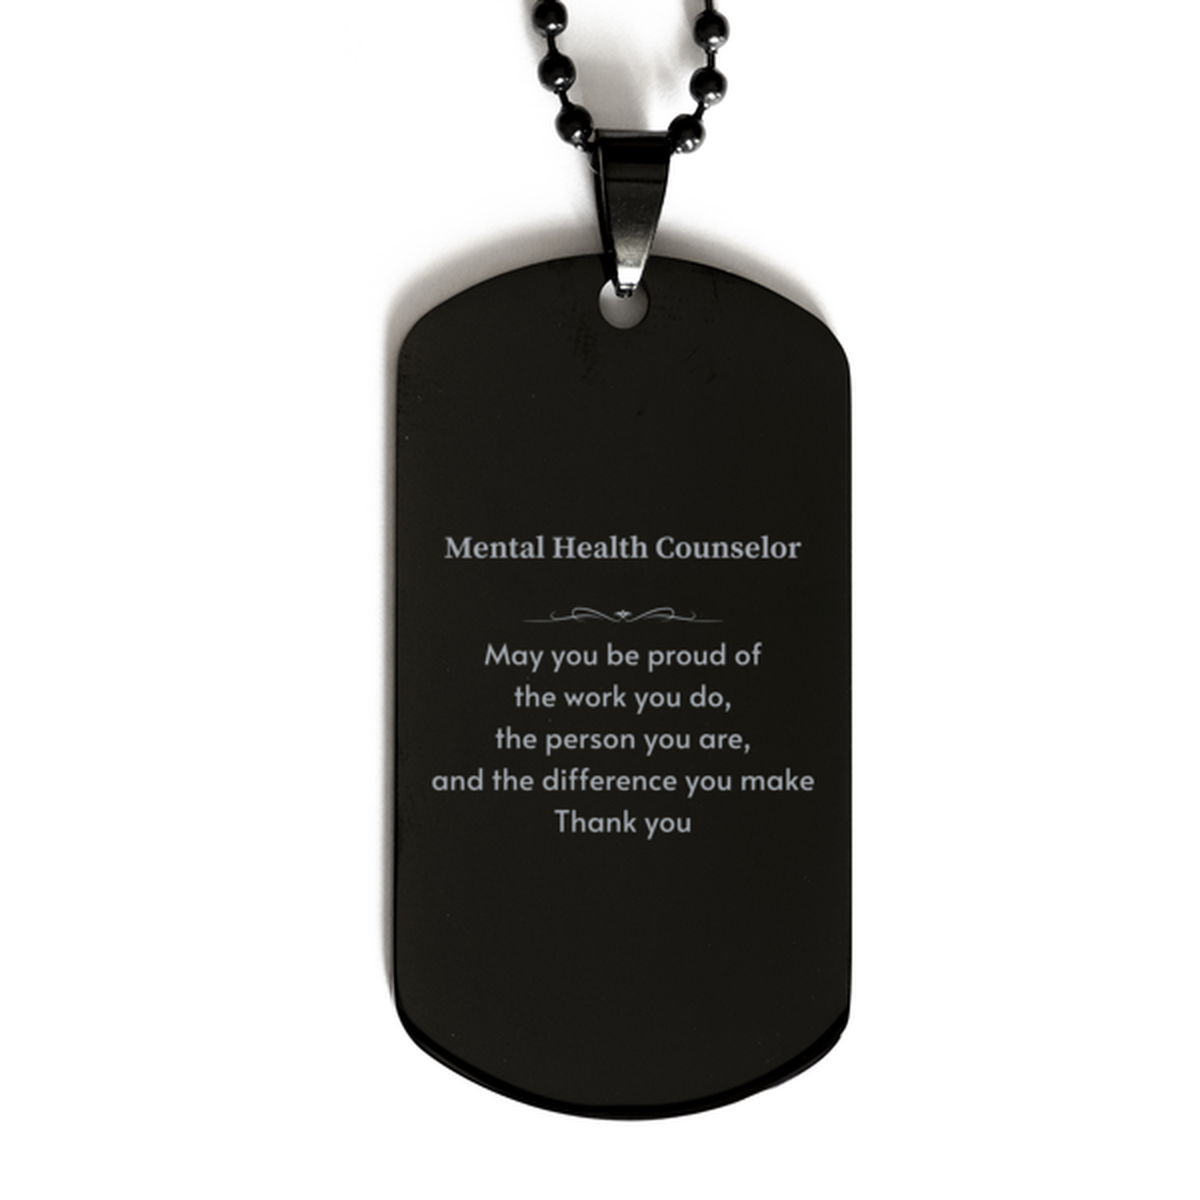 Heartwarming Black Dog Tag Retirement Coworkers Gifts for Mental Health Counselor, Mental Health Counselor May You be proud of the work you do, the person you are Gifts for Boss Men Women Friends